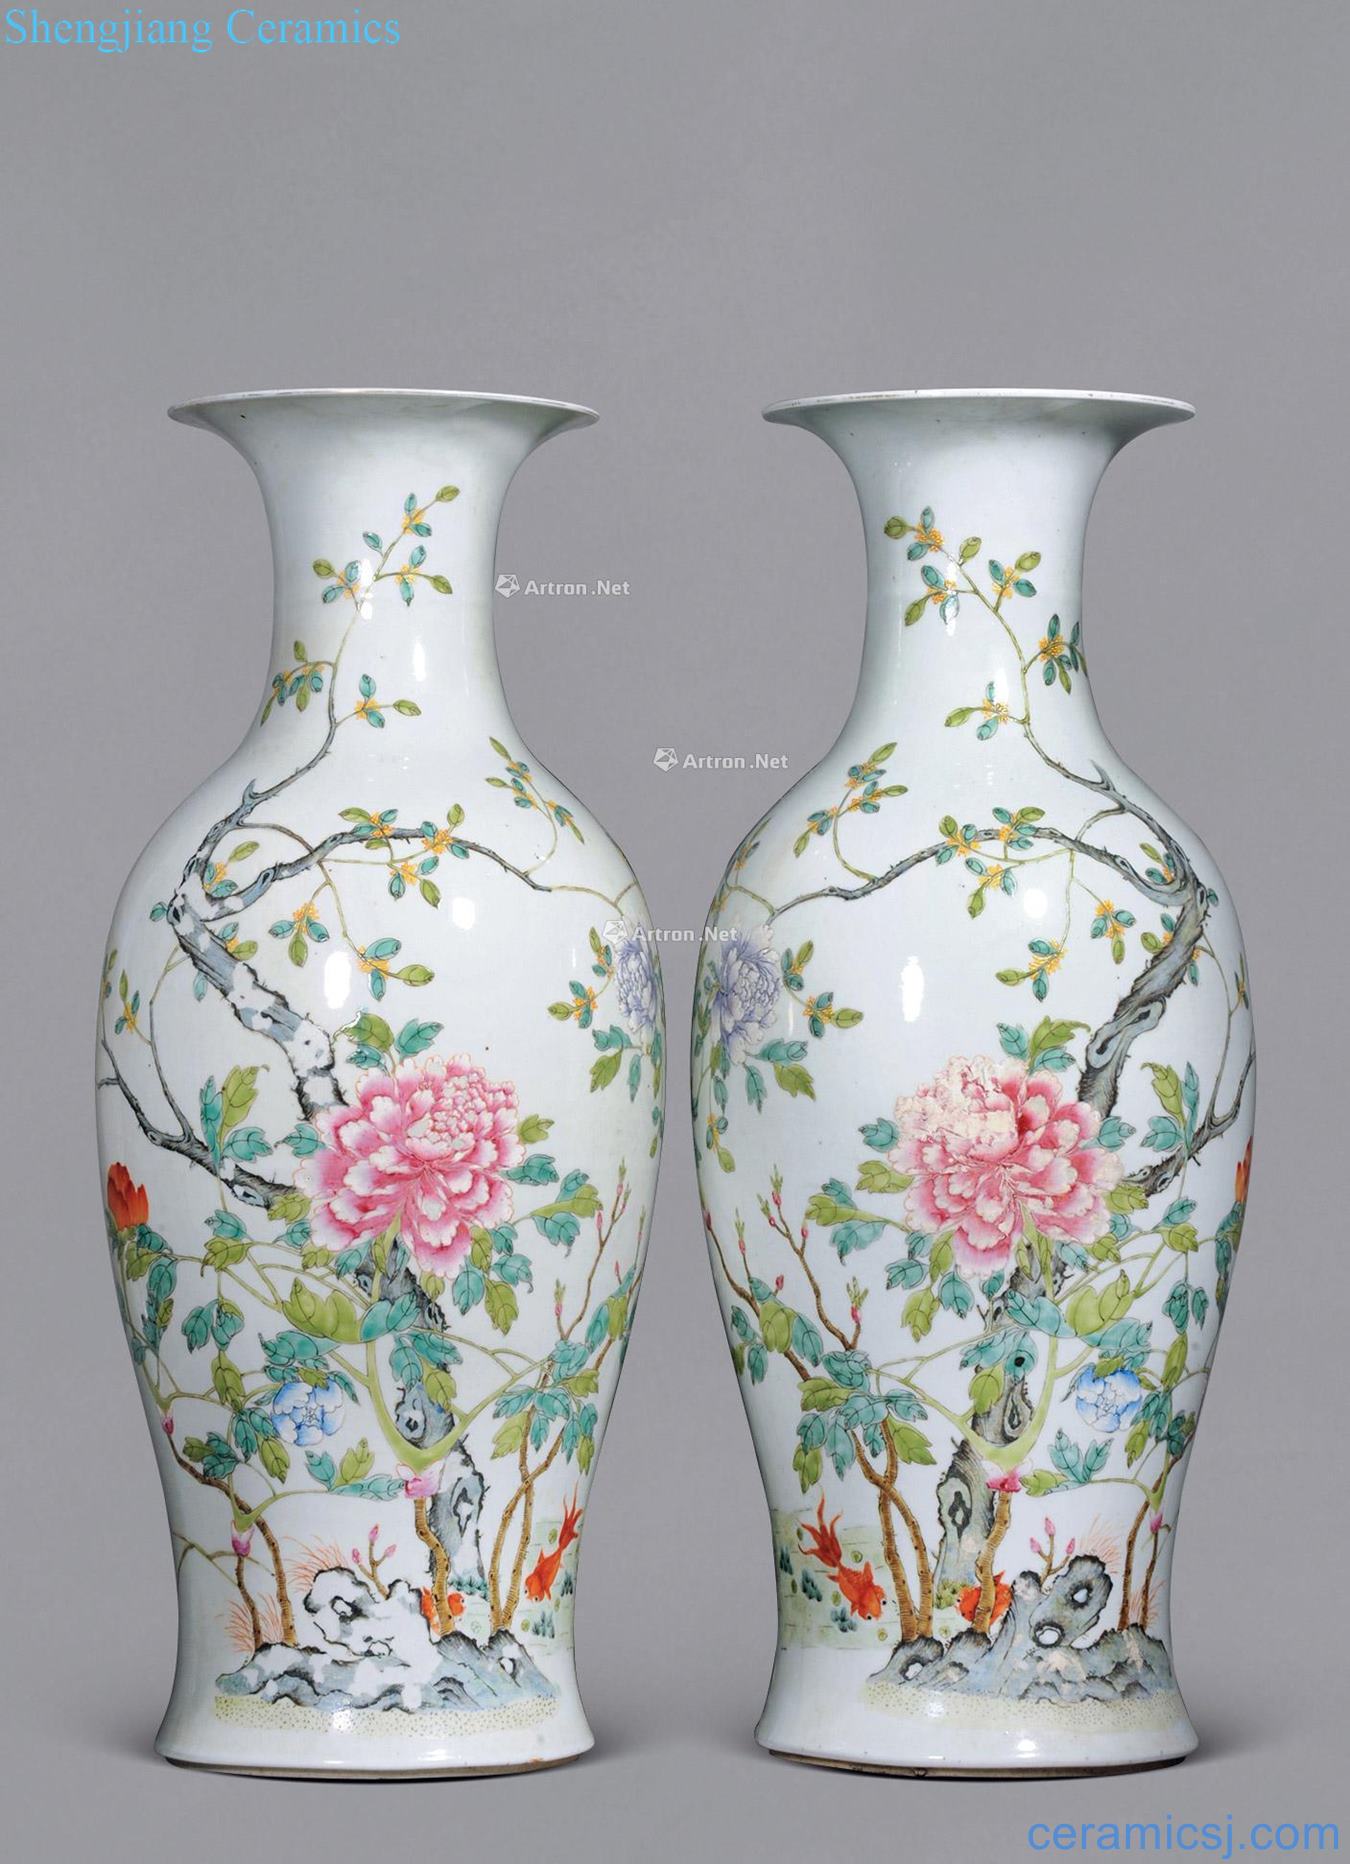 Pastel riches and honour peace reign of qing emperor guangxu goddess of mercy bottle (a)